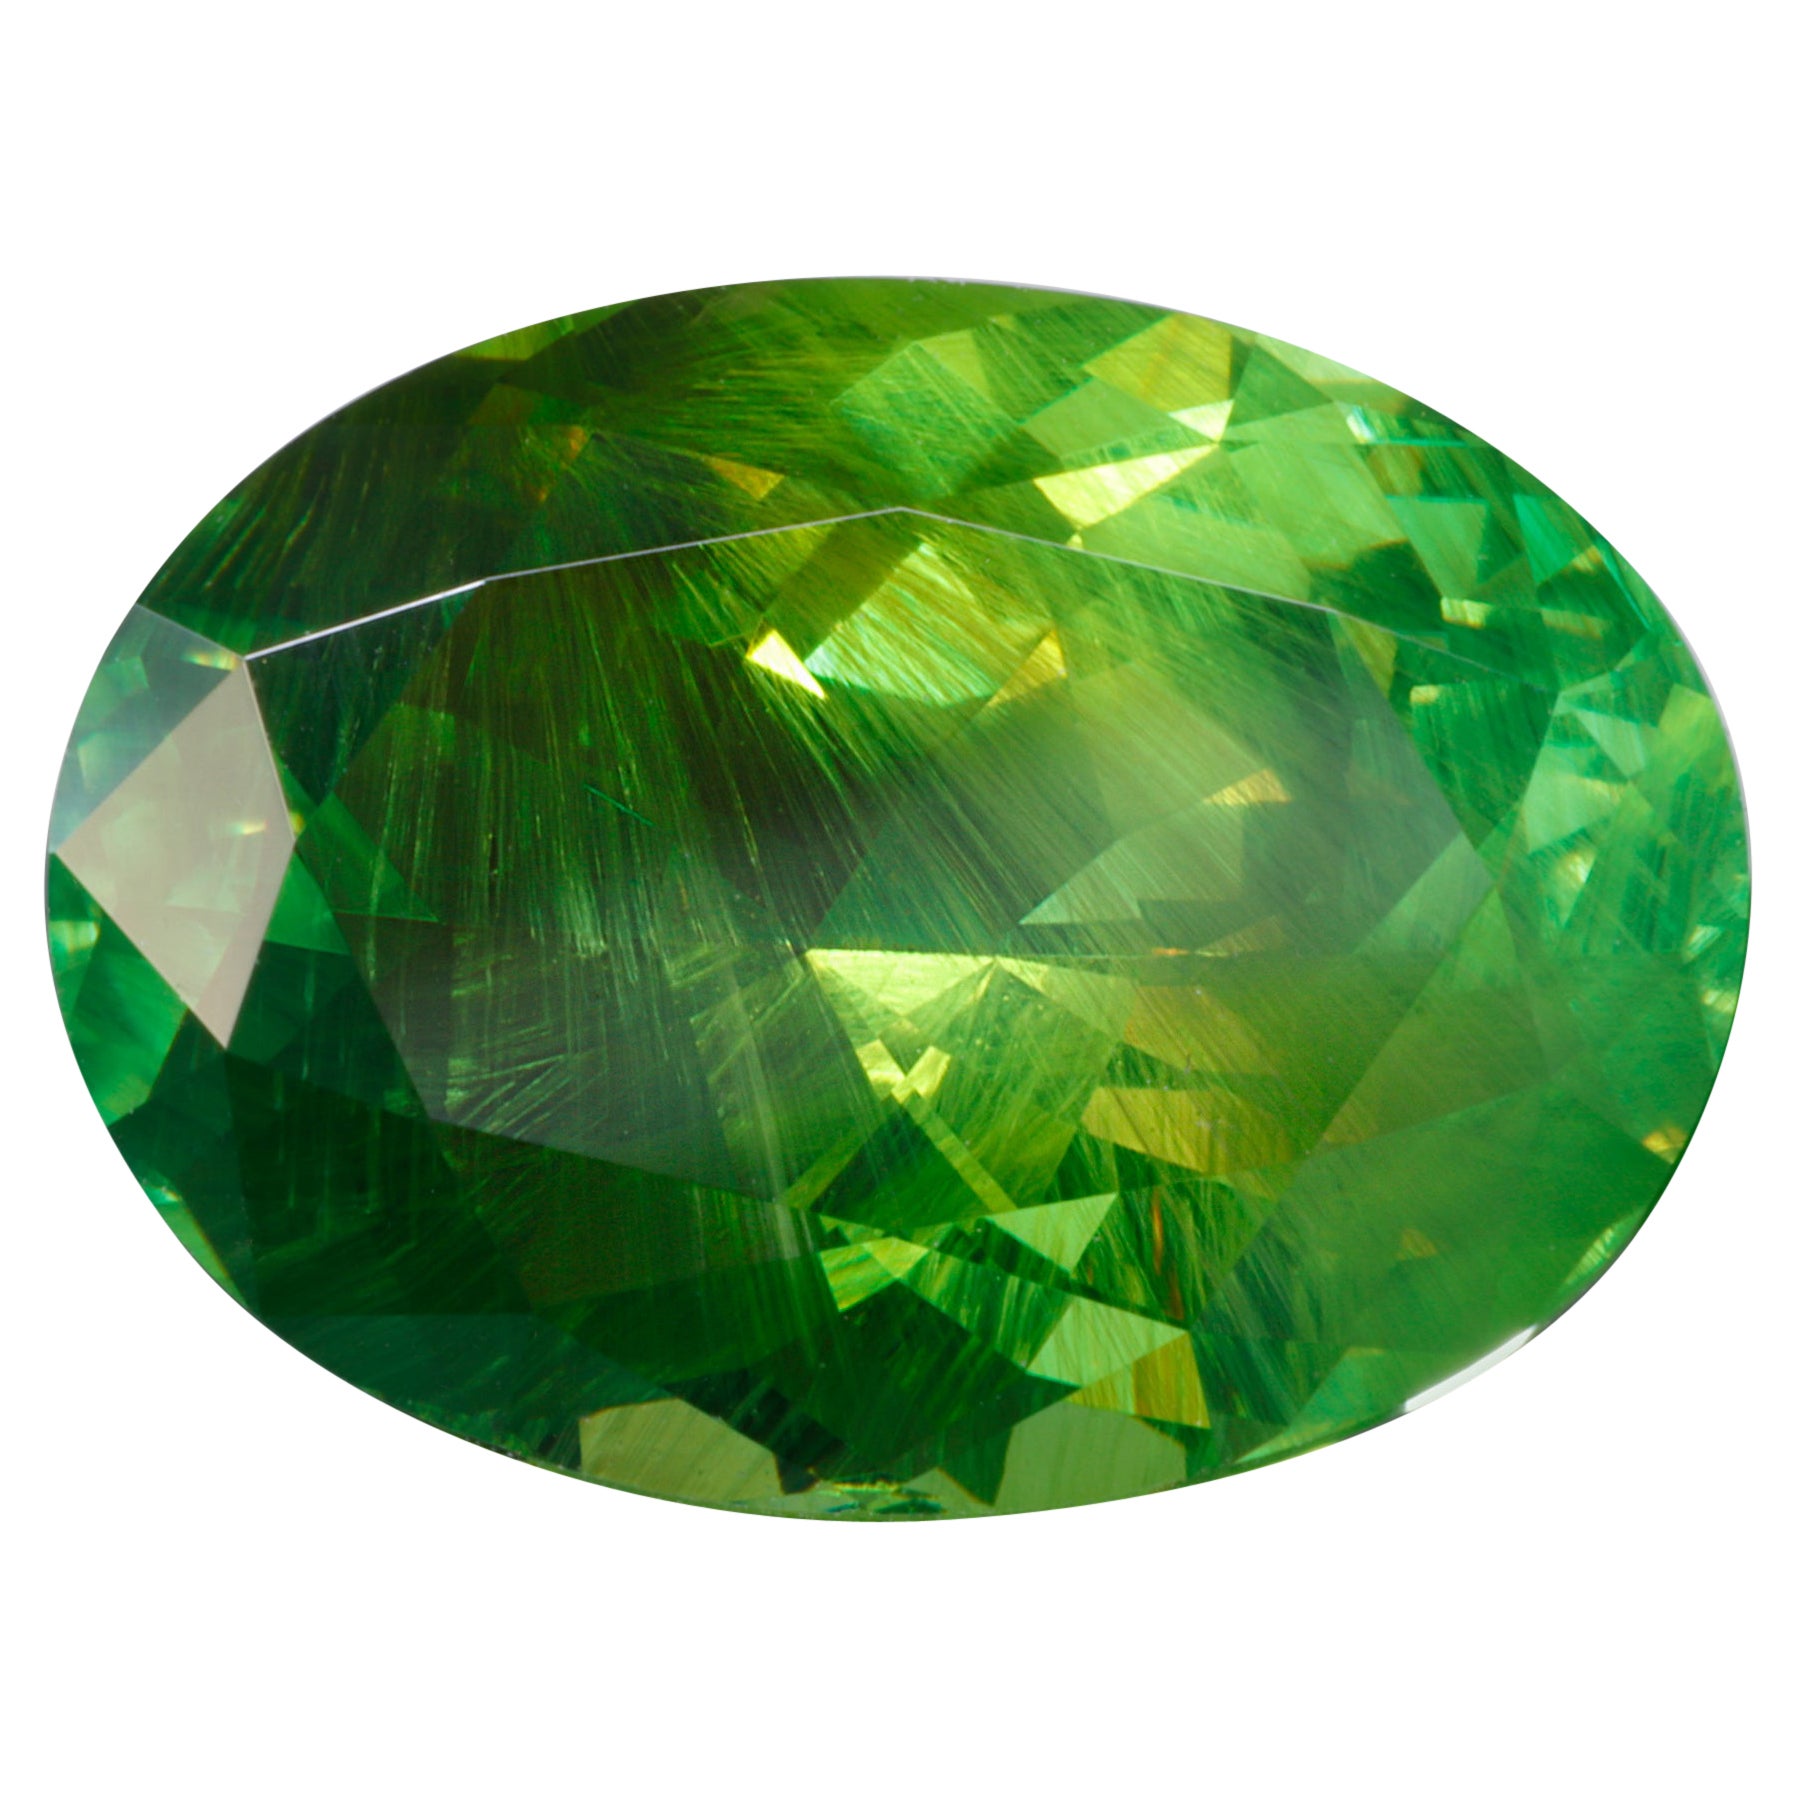 Exceptional Horsetail Inclusion 5 Carat Demantoid Garnet from Russia For Sale